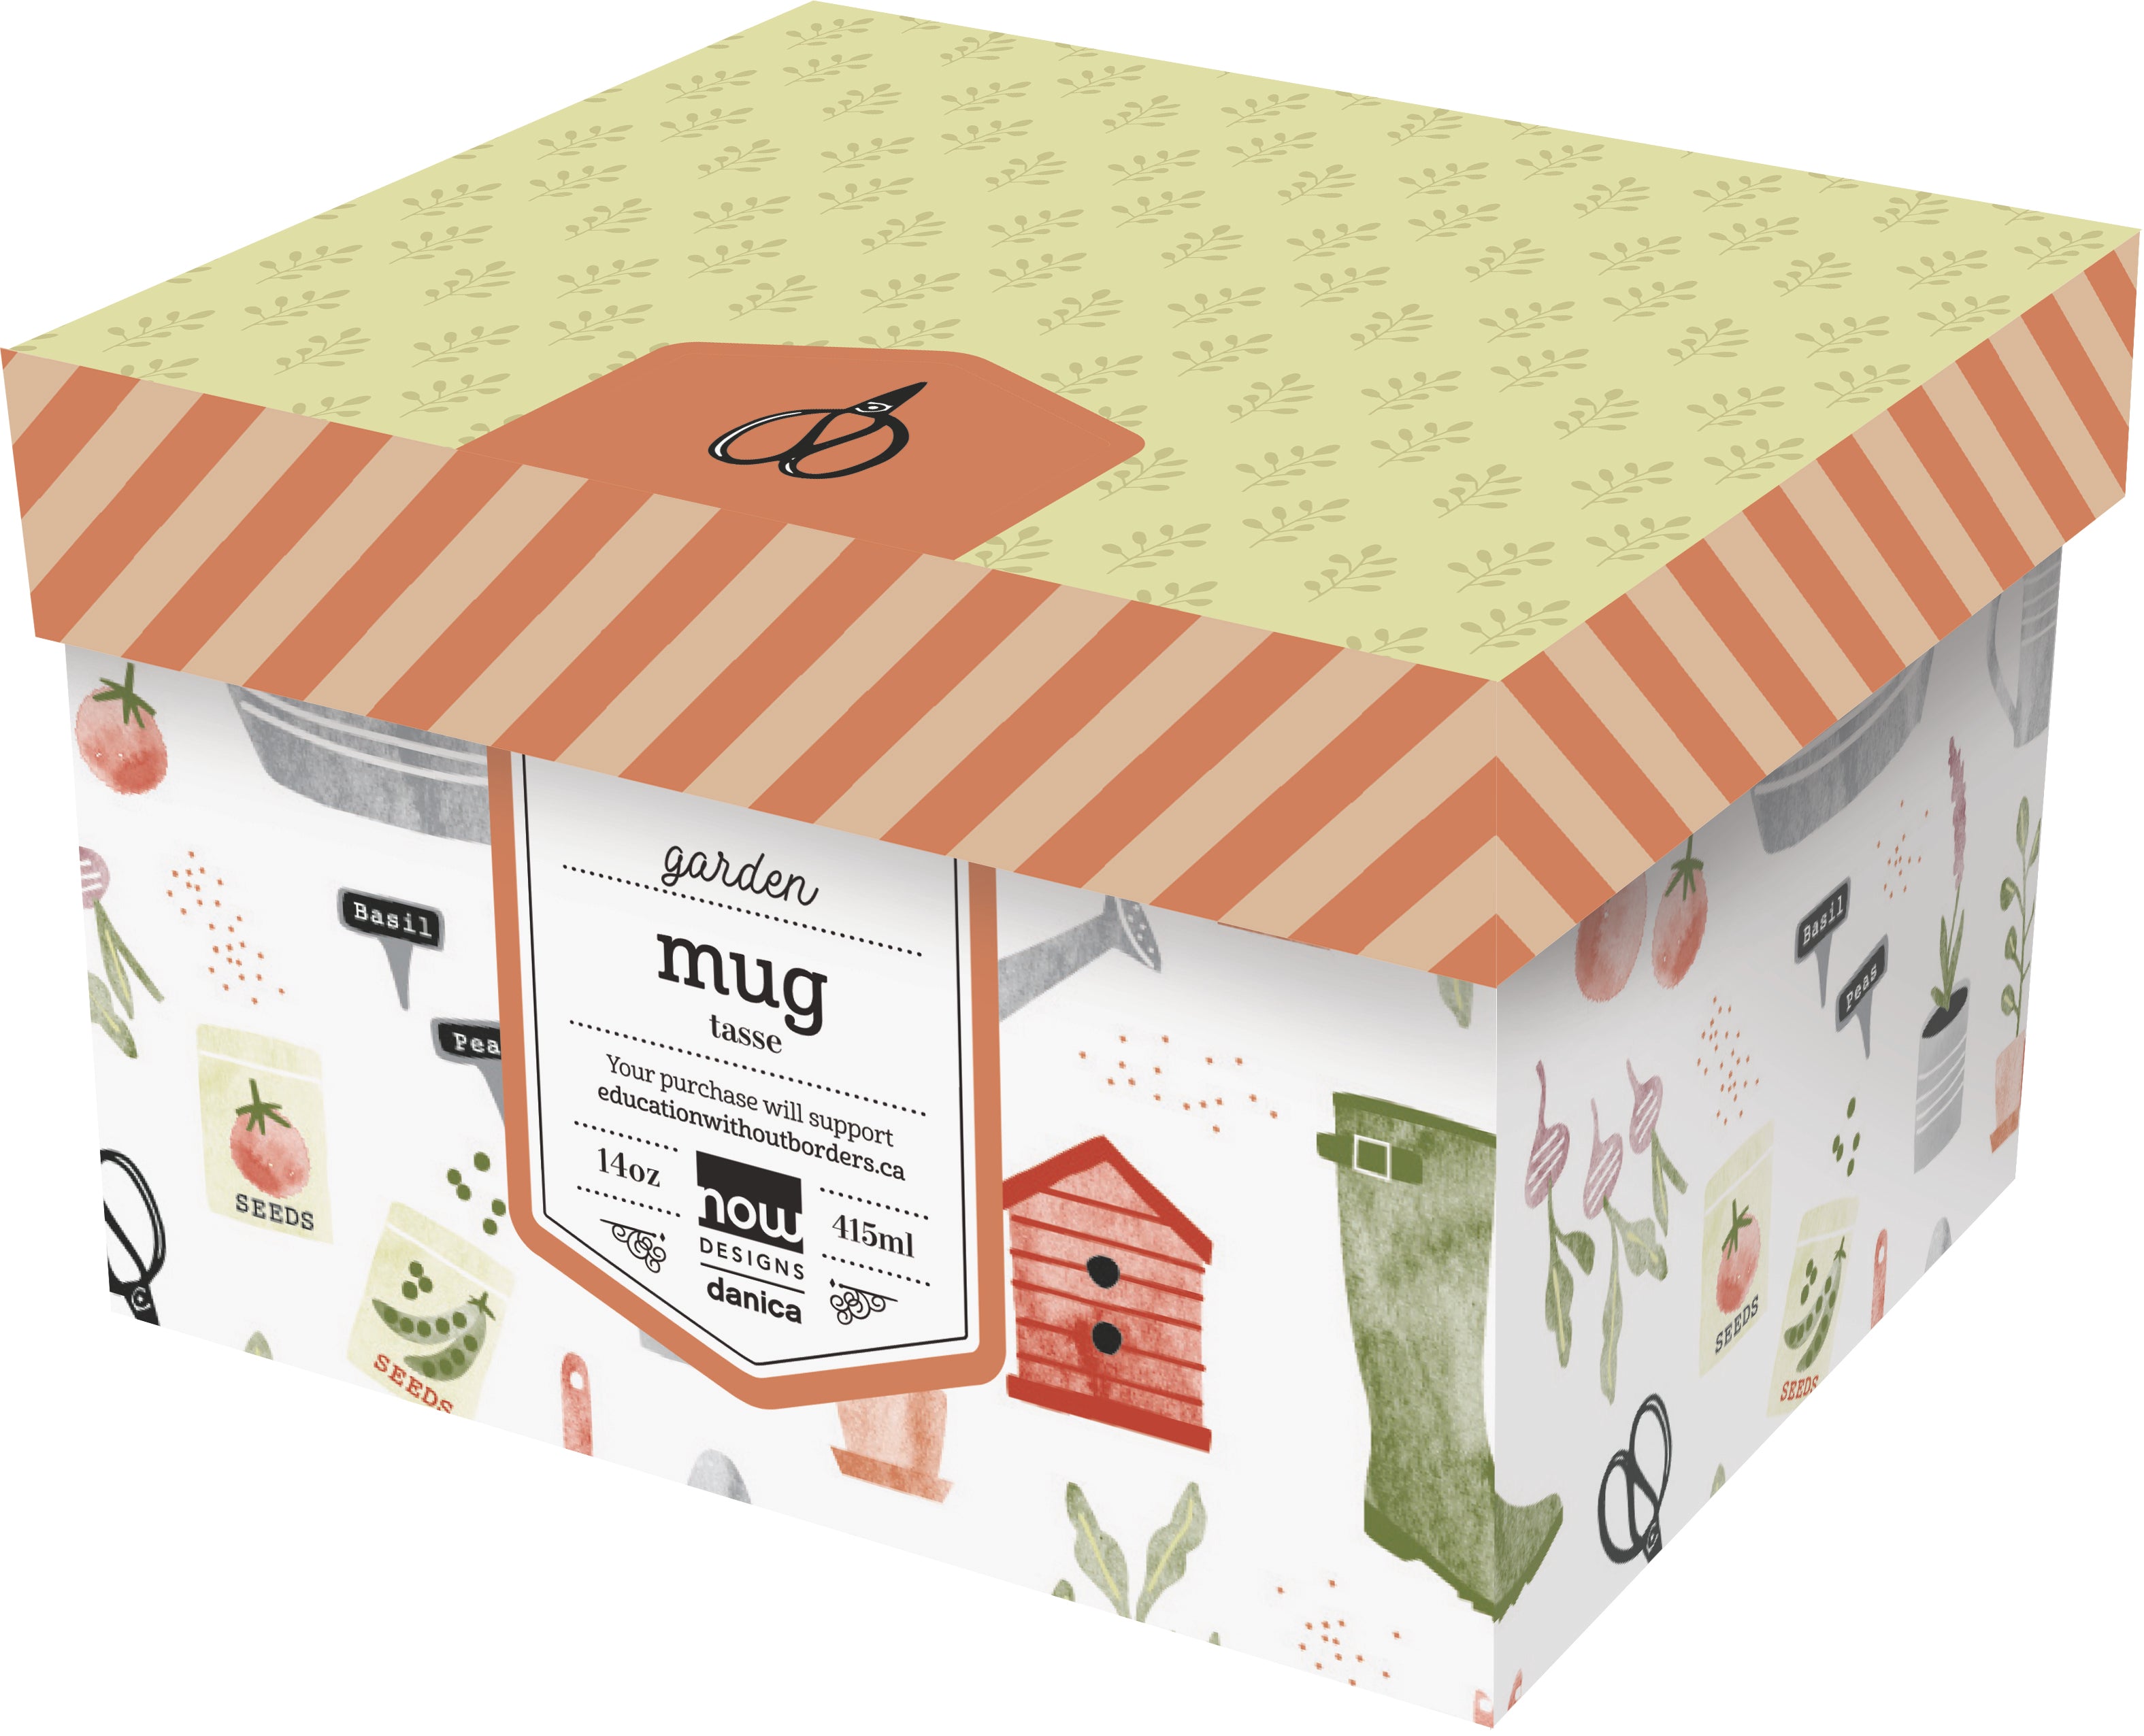 box with different, yellow, orange, and white patterns featuring different garden related images and a product label